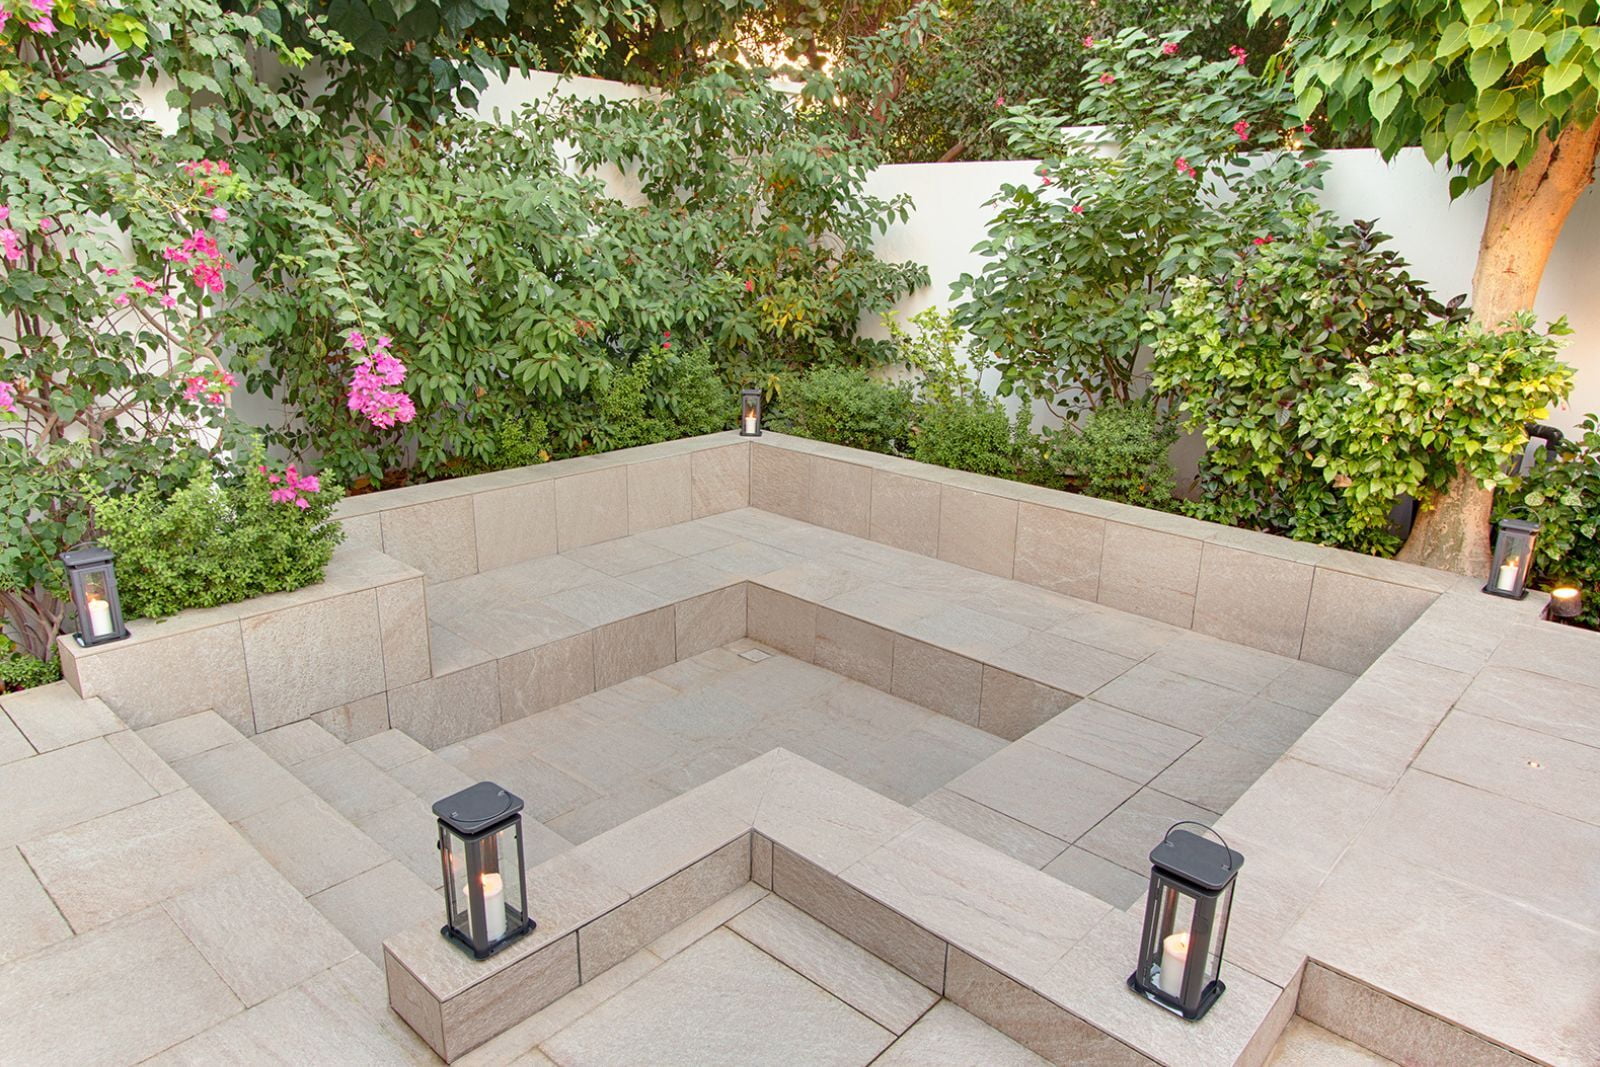 Sunken Seating provide an exciting charm in your backyard.